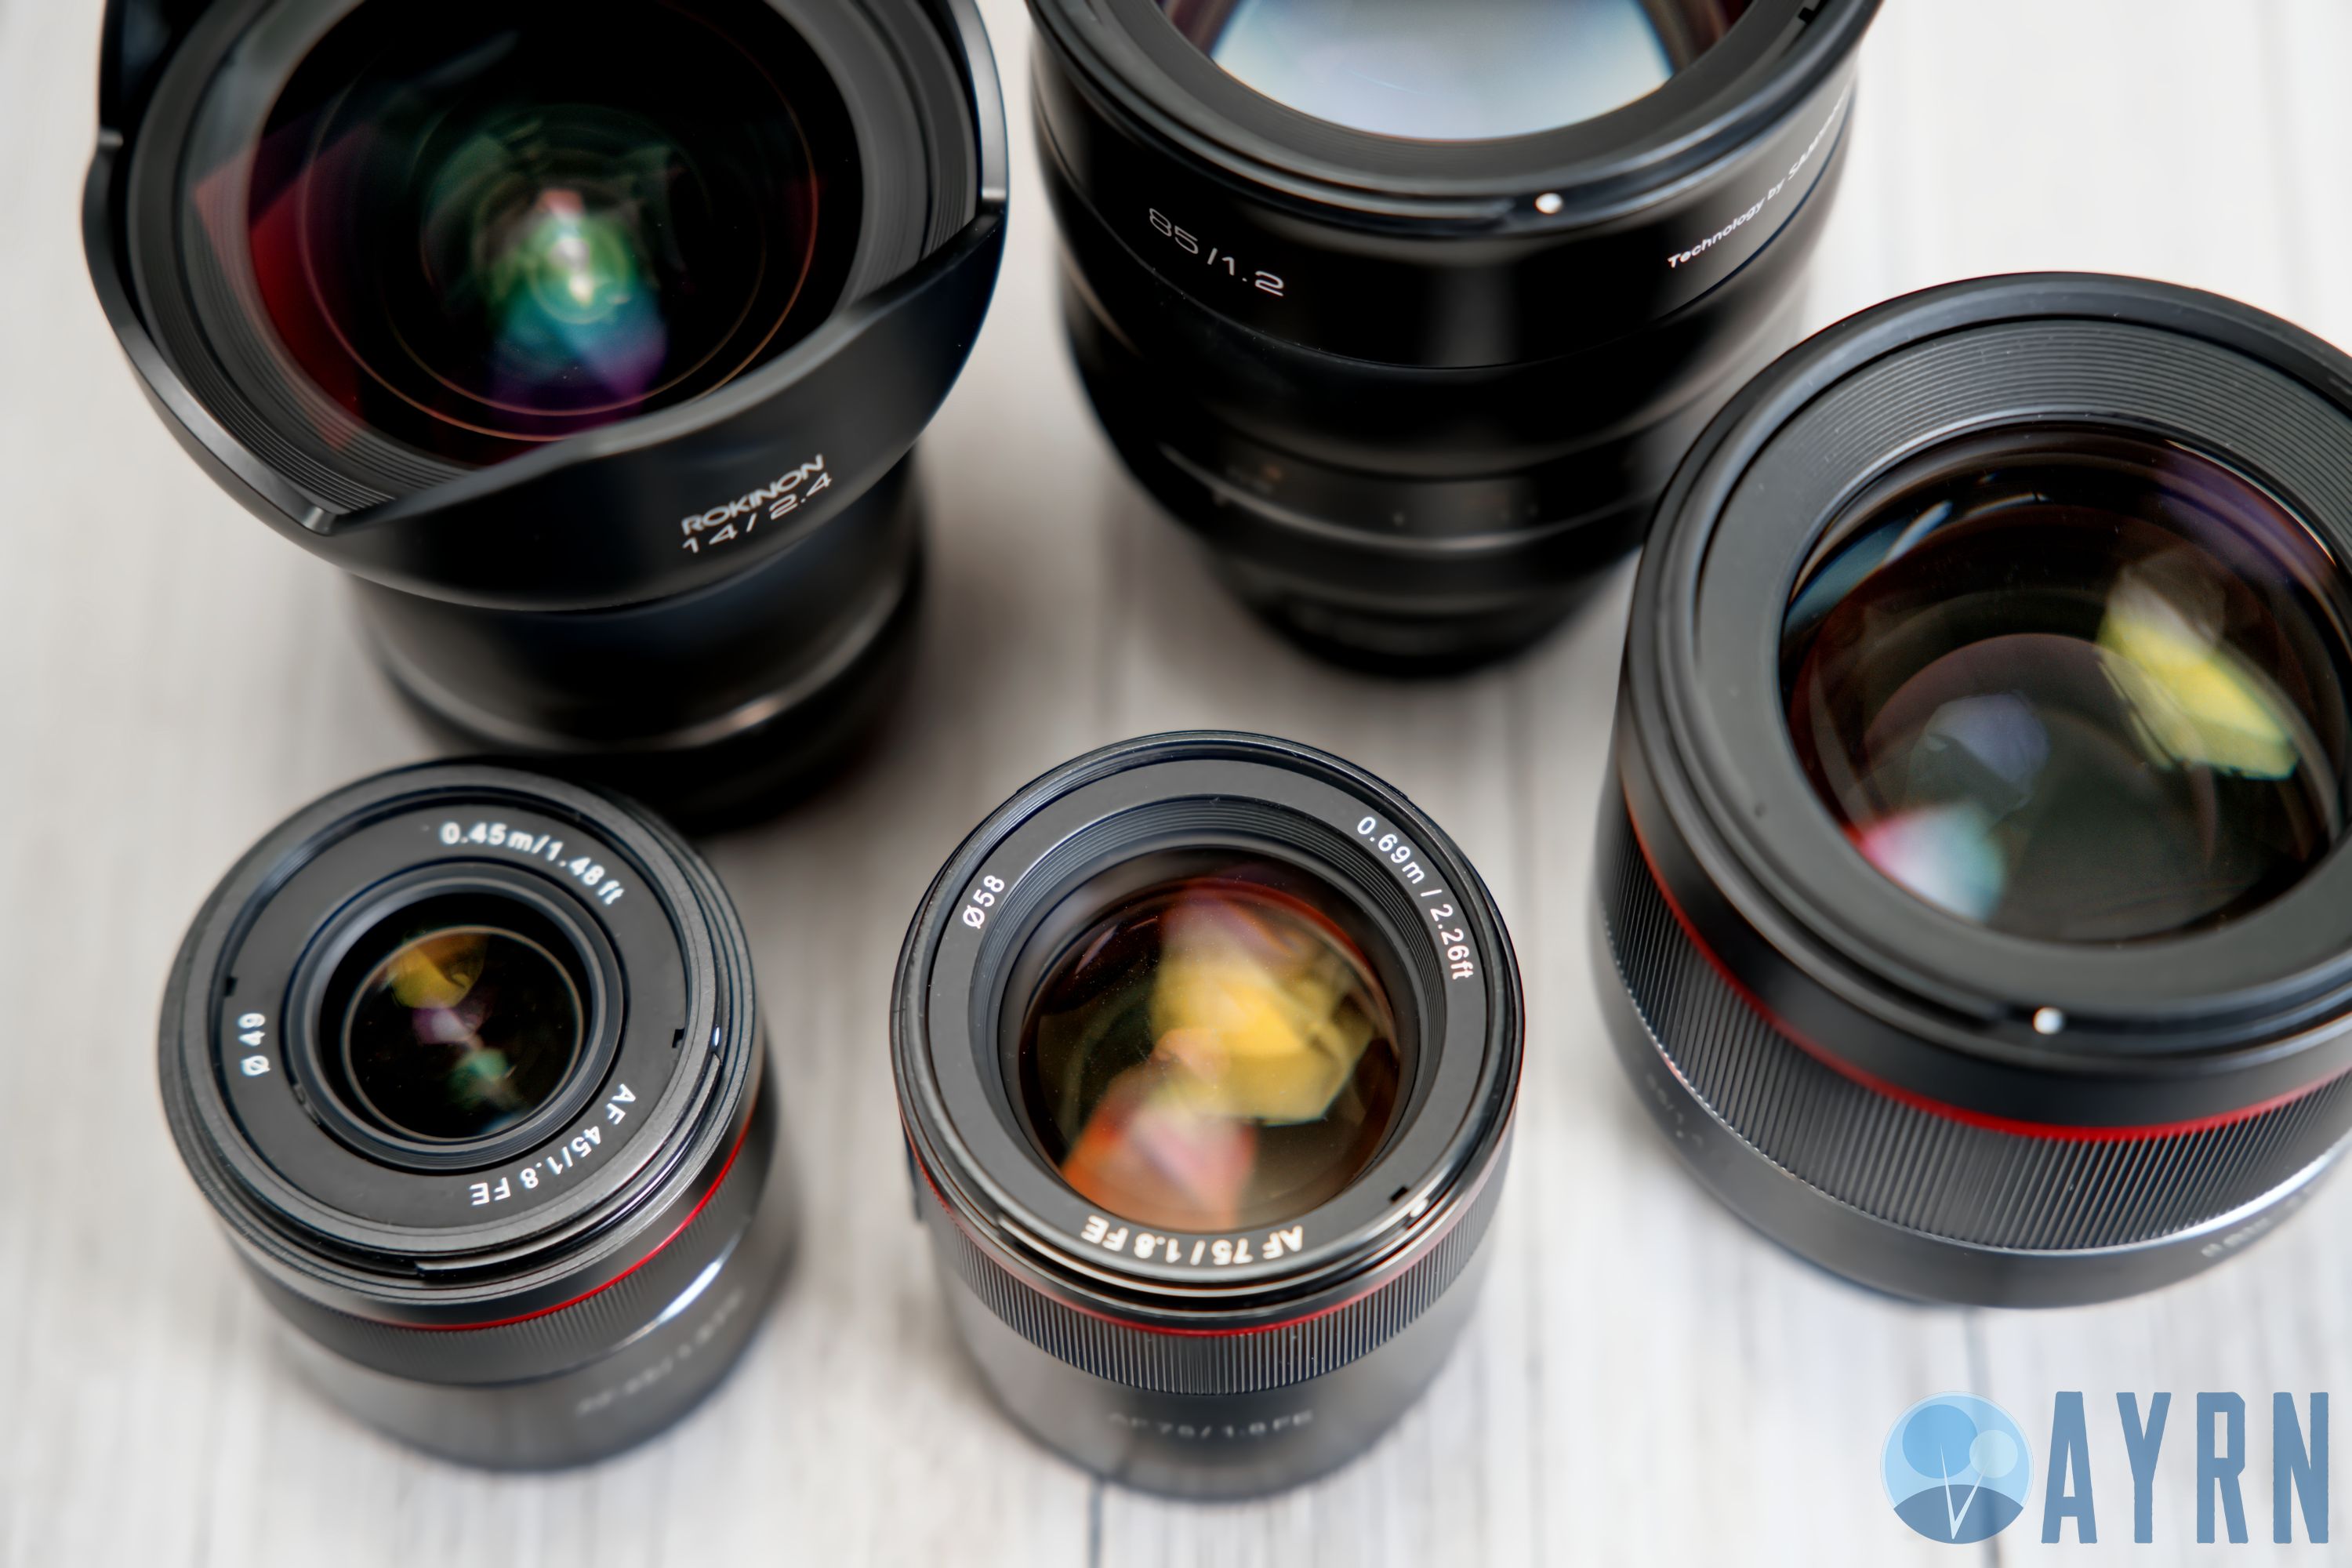 FOR SIZE COMPARISON, TOP LEFT TO BOTTOM RIGHT: ROKINON 14MM F/2.2 XP, ROKINON 85MM F/1.2 XP, ROKINON AF 85MM F/1.8 FE, ROKINON AF 45MM F/1.8 FE, ROKINON AF 75MM F/1.8 FE 